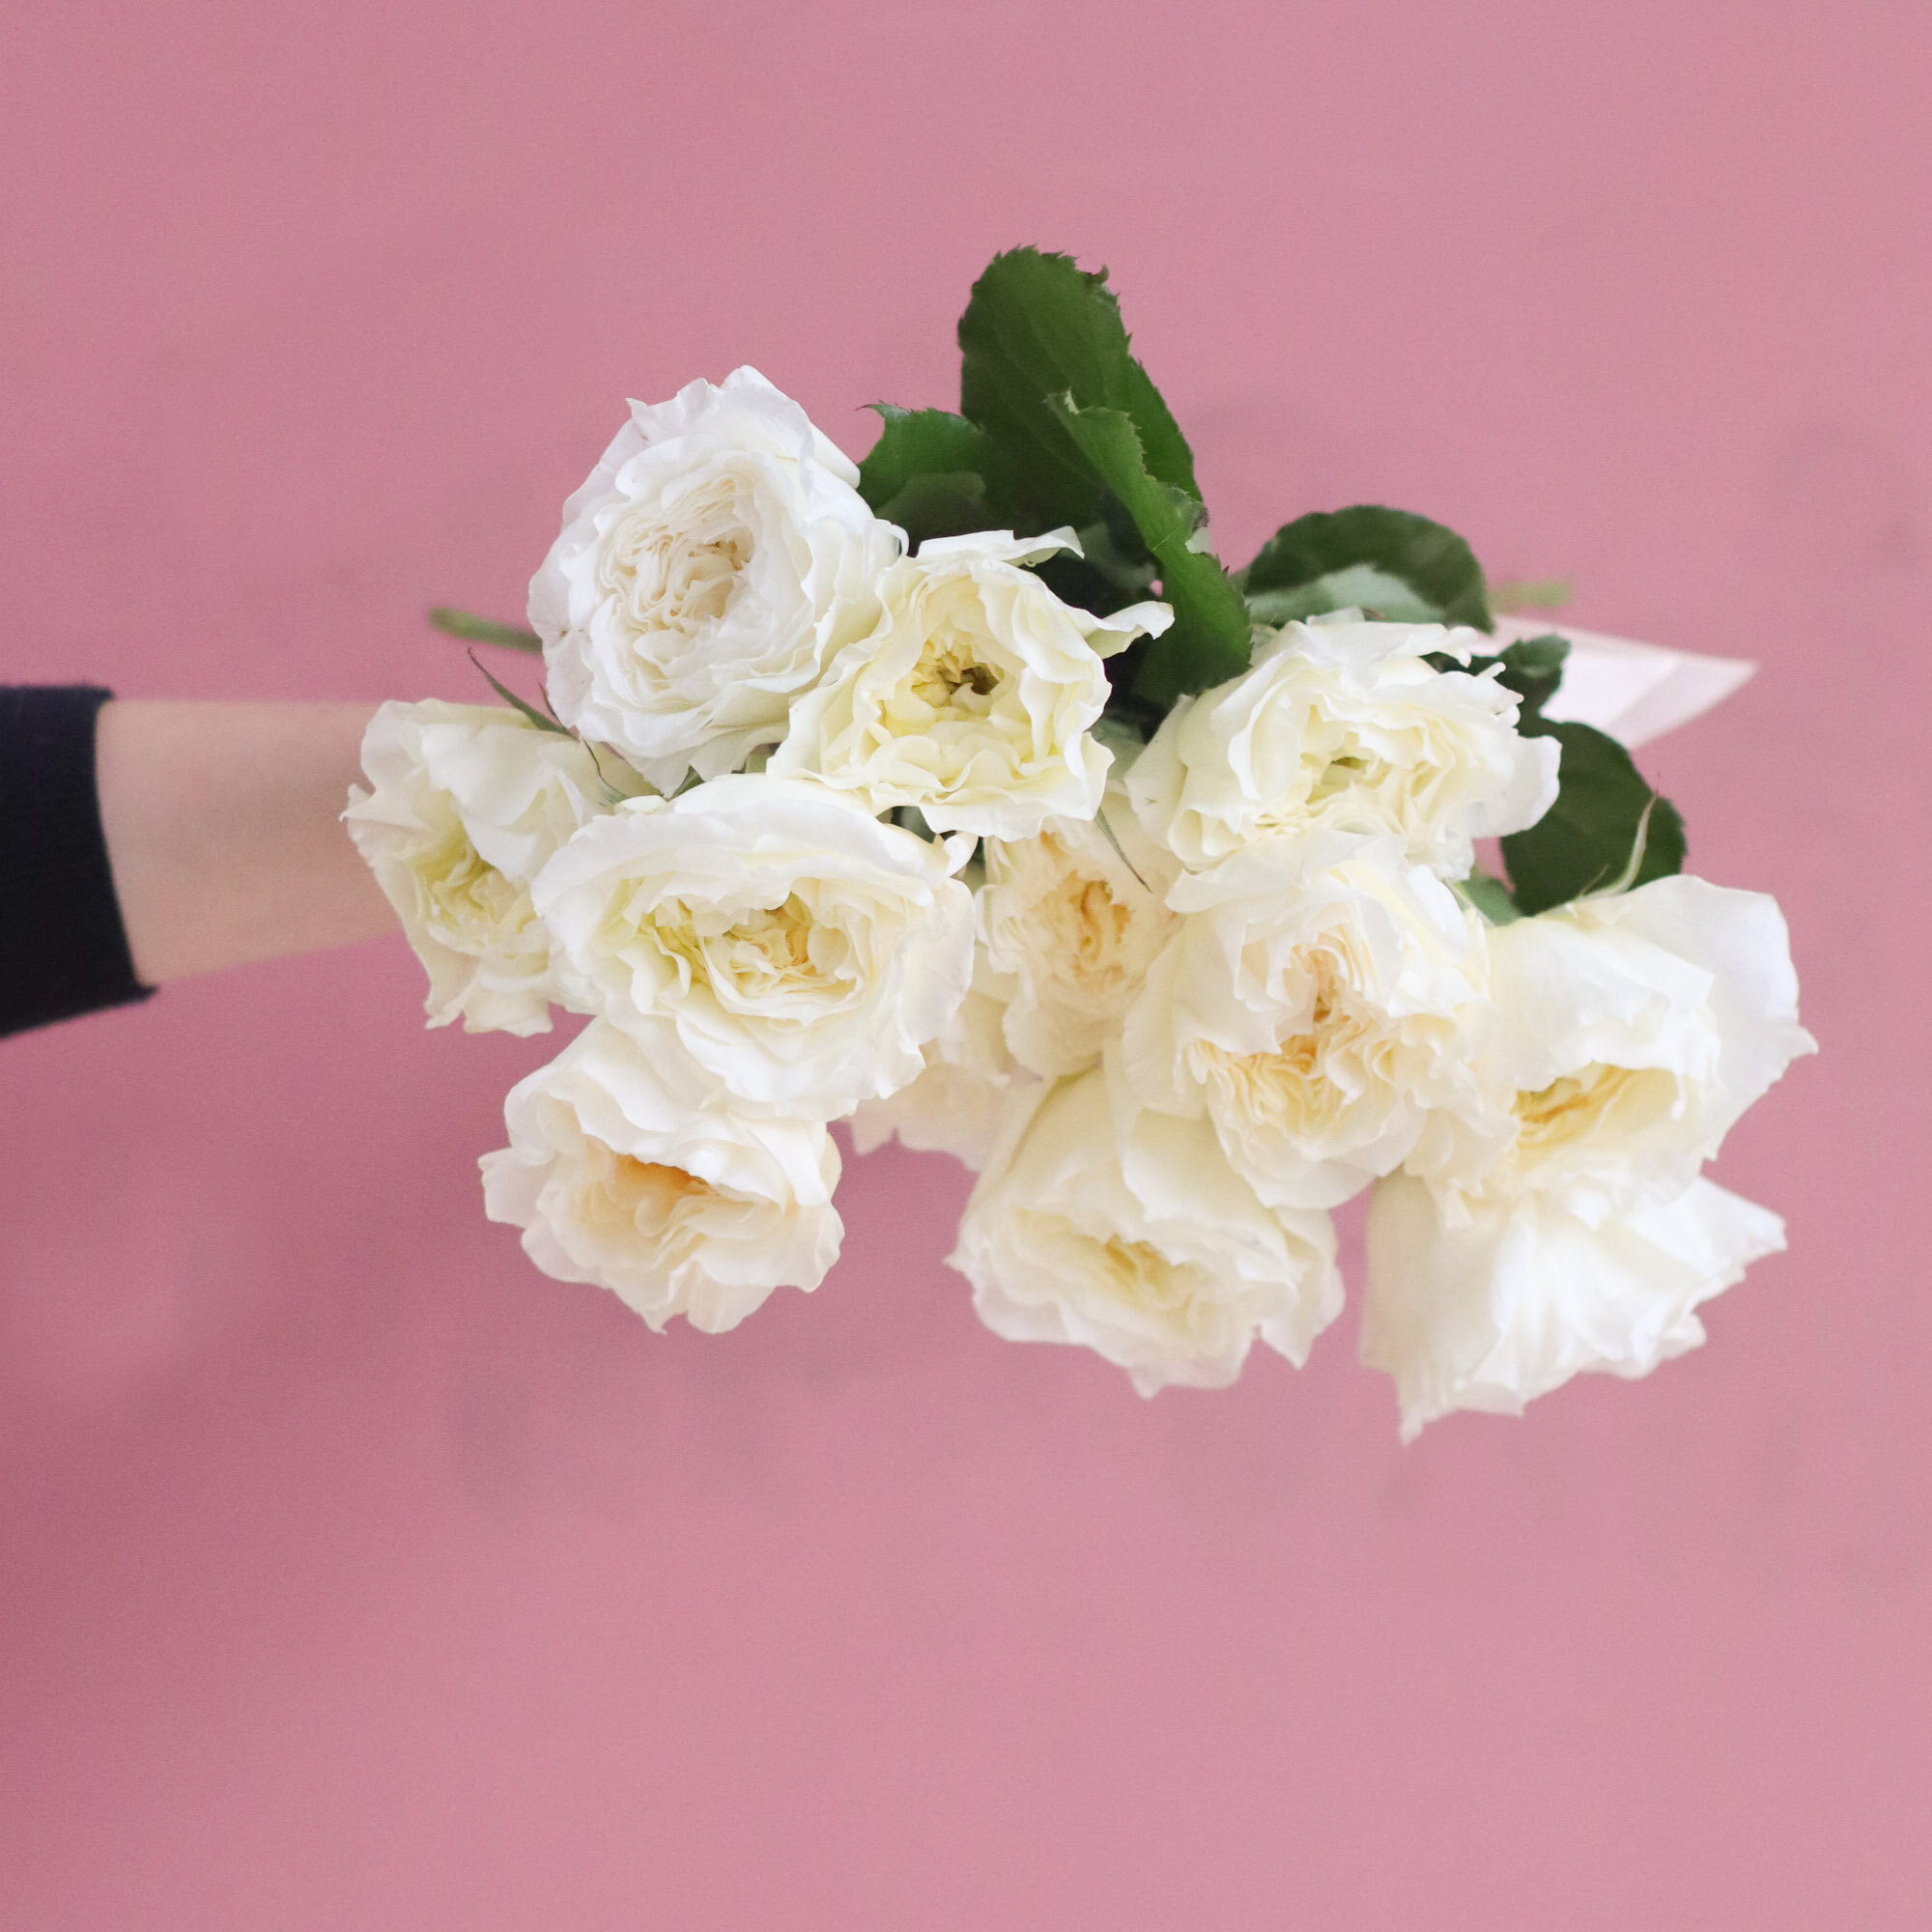 A bouquet of white David Austin roses pointed toward the camera on a pink background